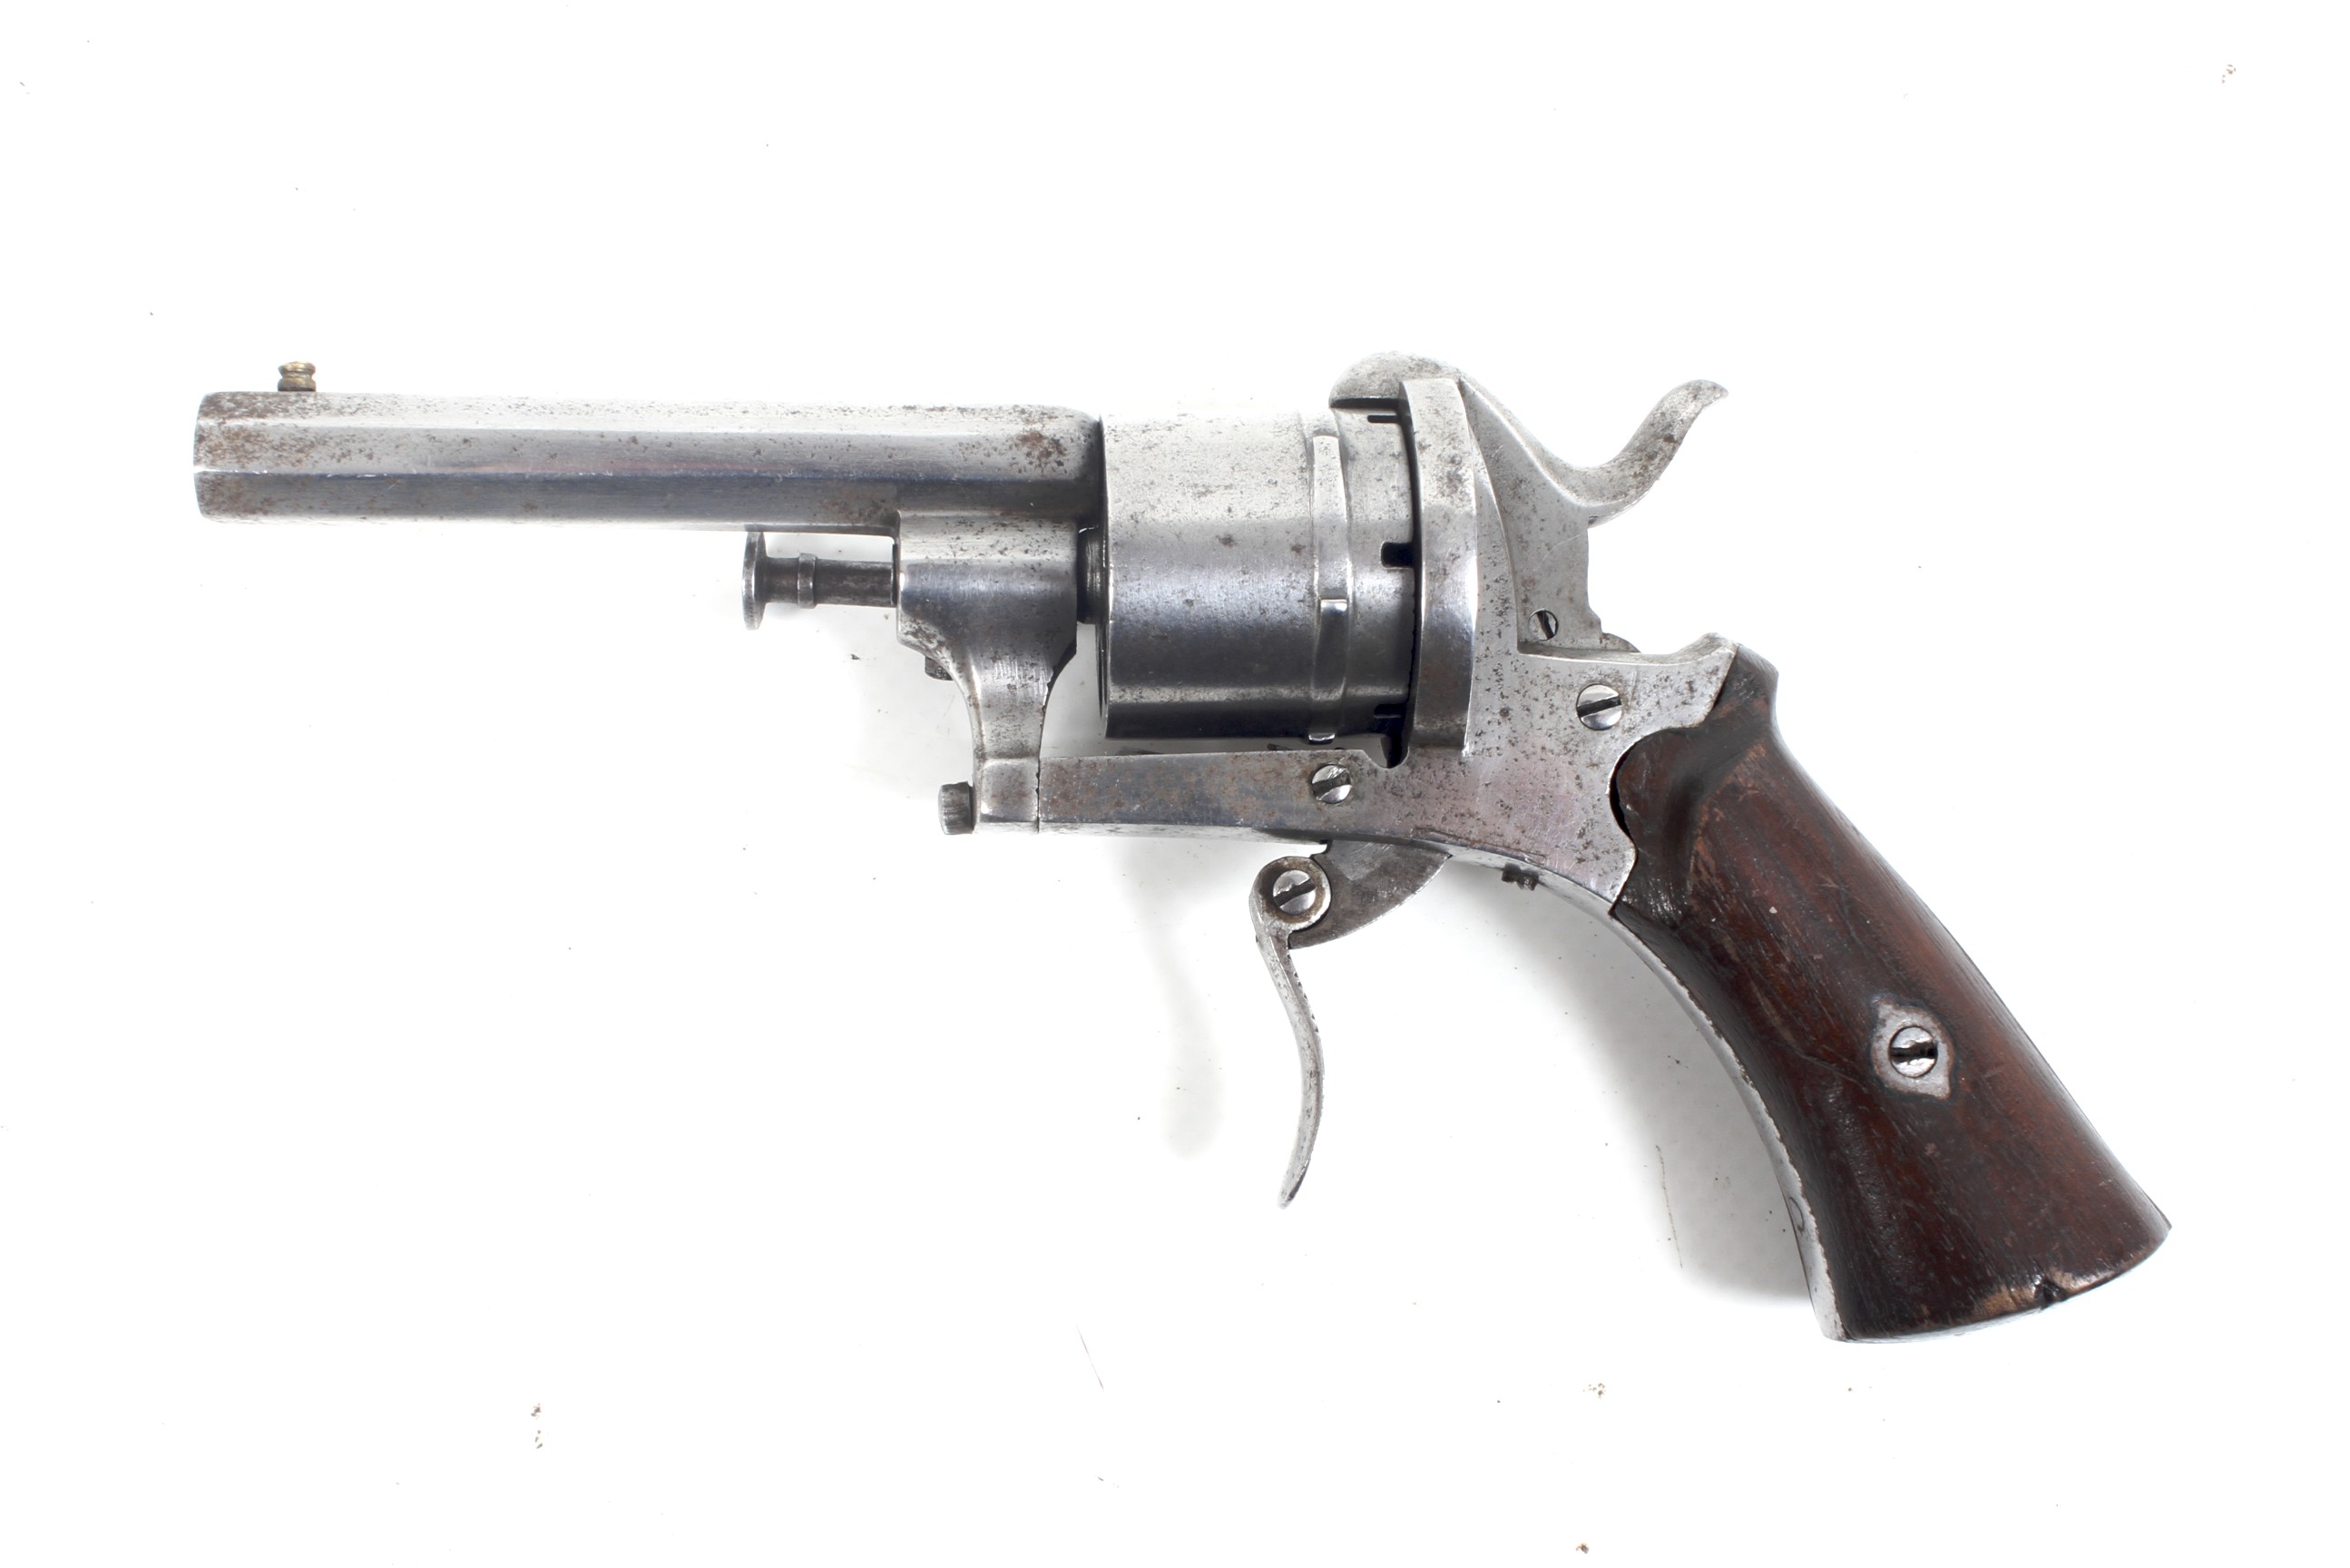 A circa 1890 pin fire revolver. In working condition. No license required to purchase. - Image 2 of 2